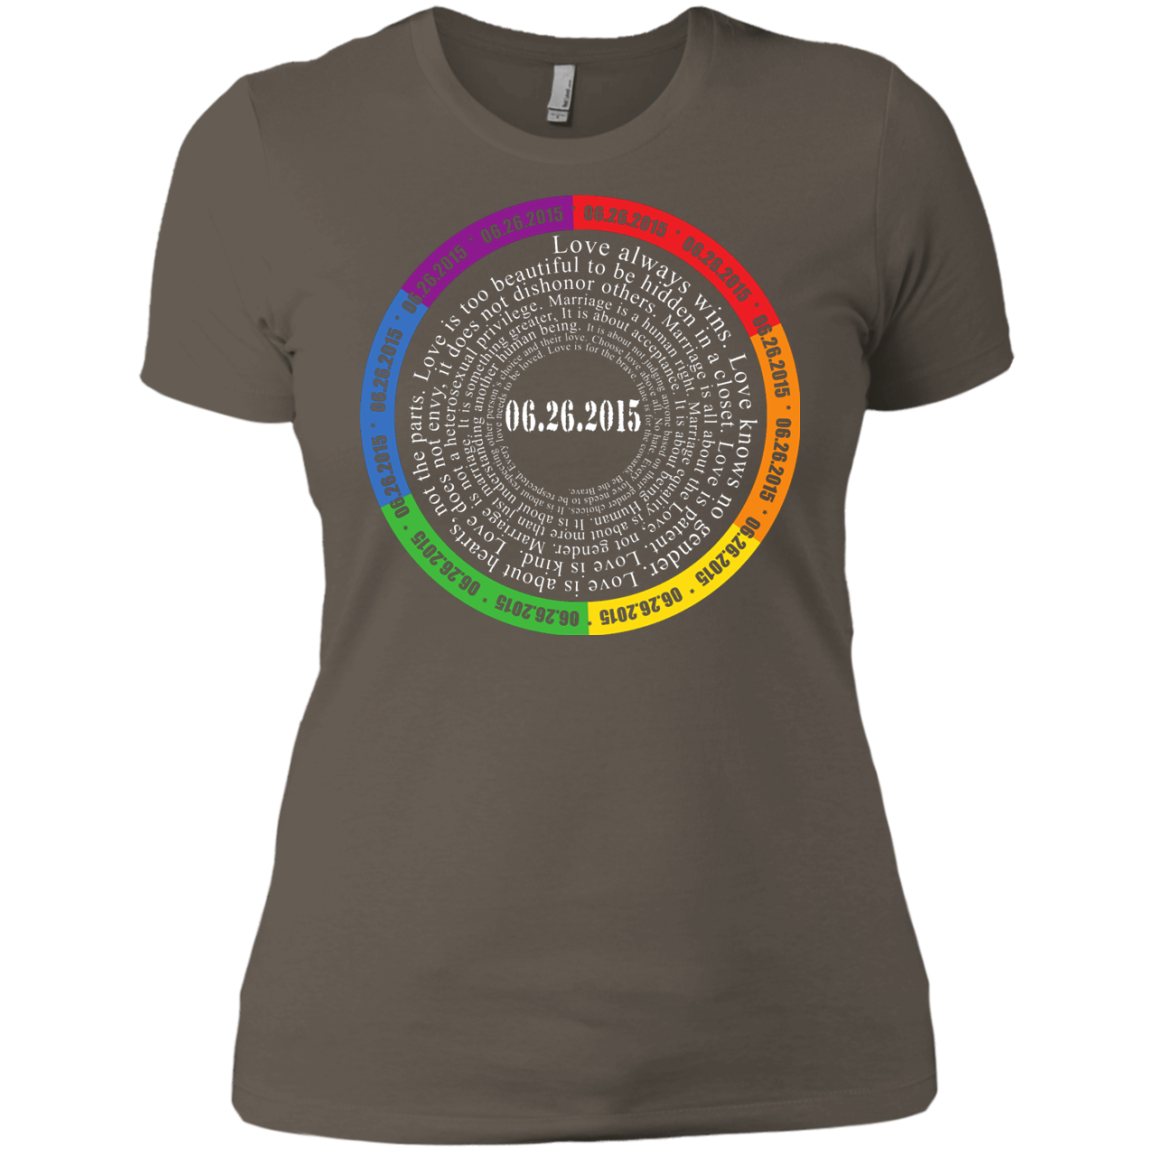 The "Pride Month" Special Shirt LGBT Pride round neck sport shirt for women